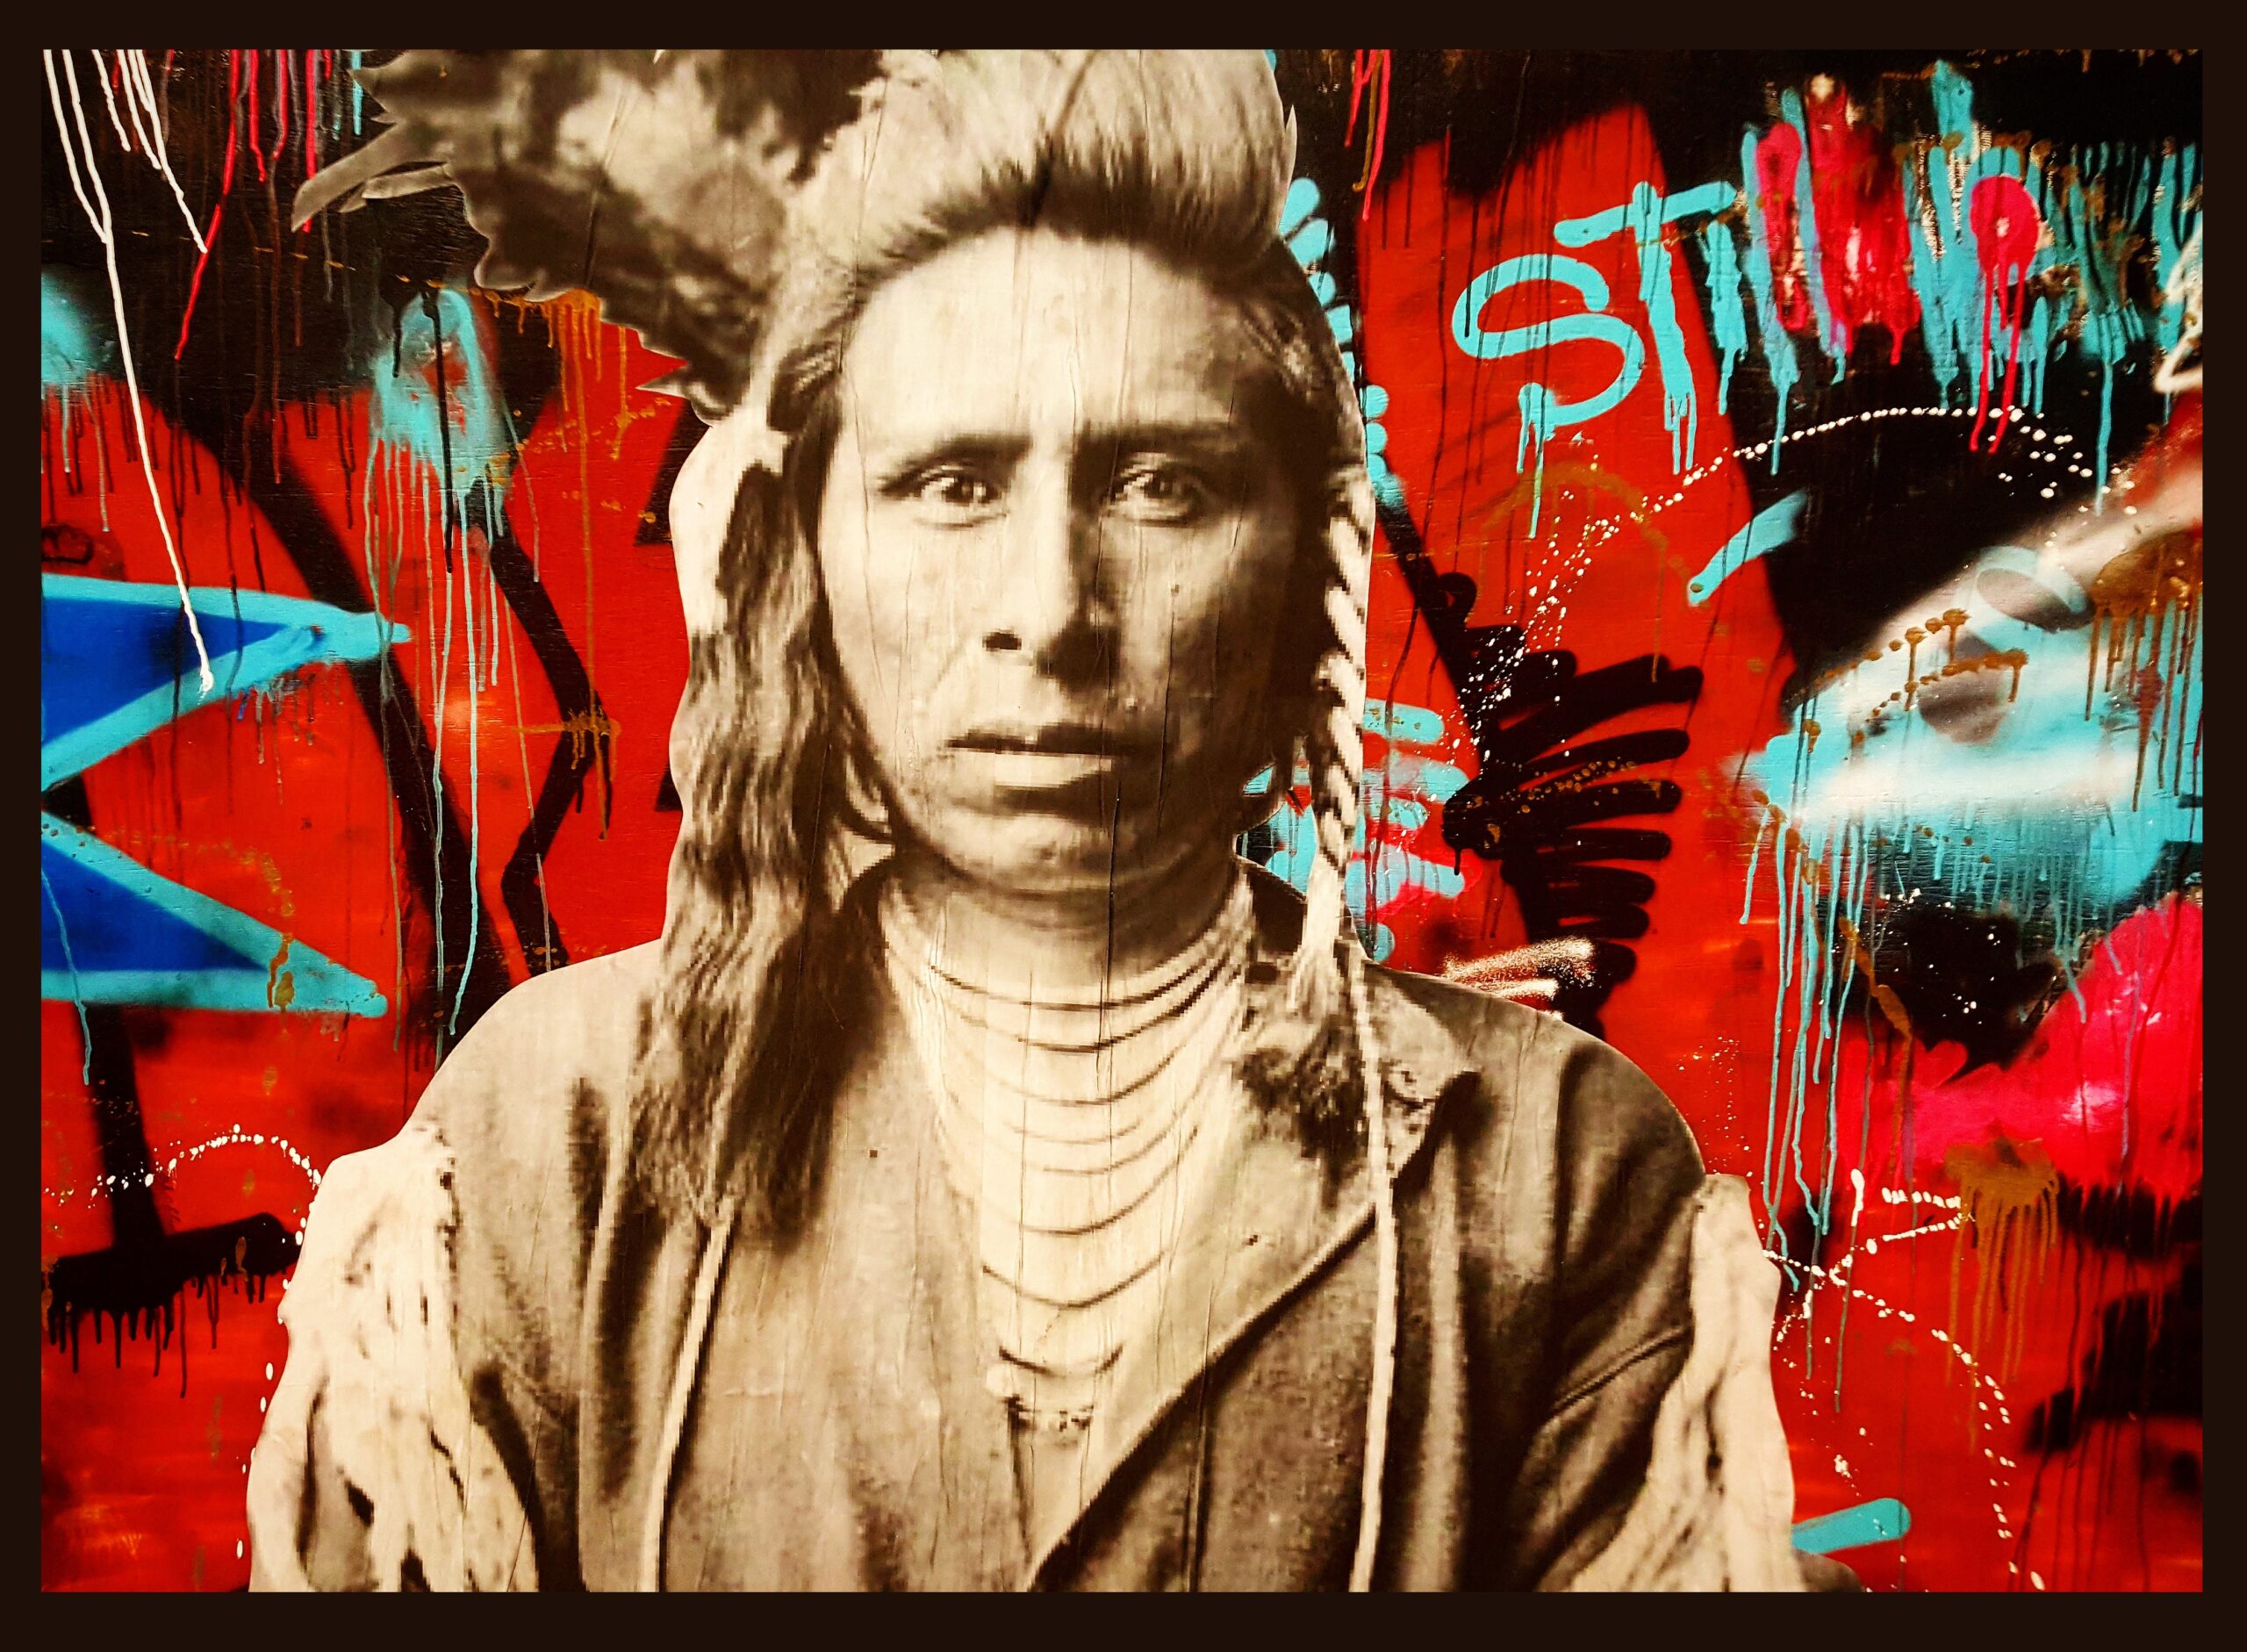 Native American image with graffiti style lettering. Background red, turquoise, and black